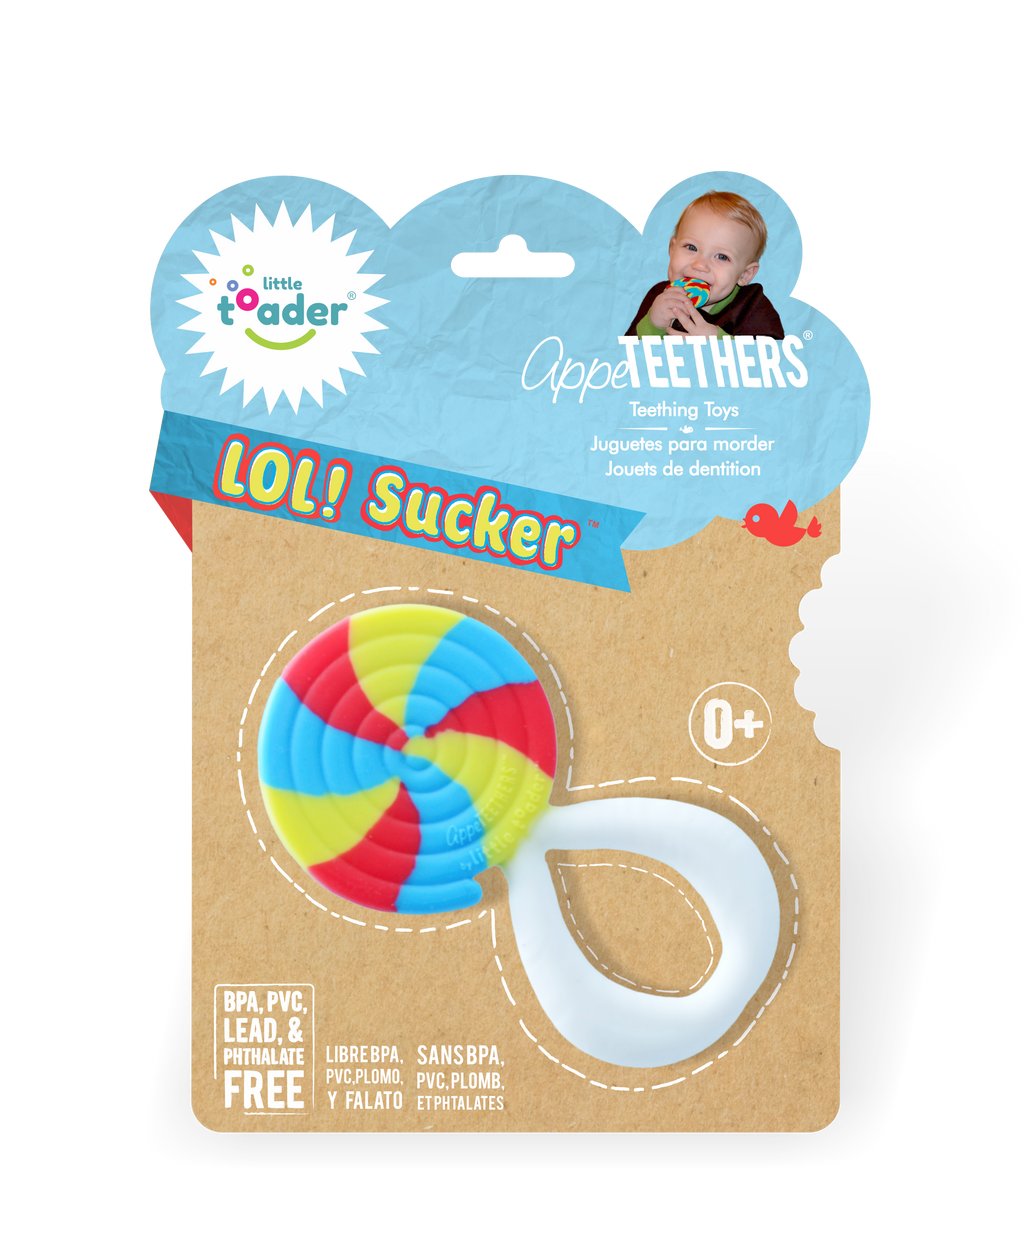 little toader appeteethers